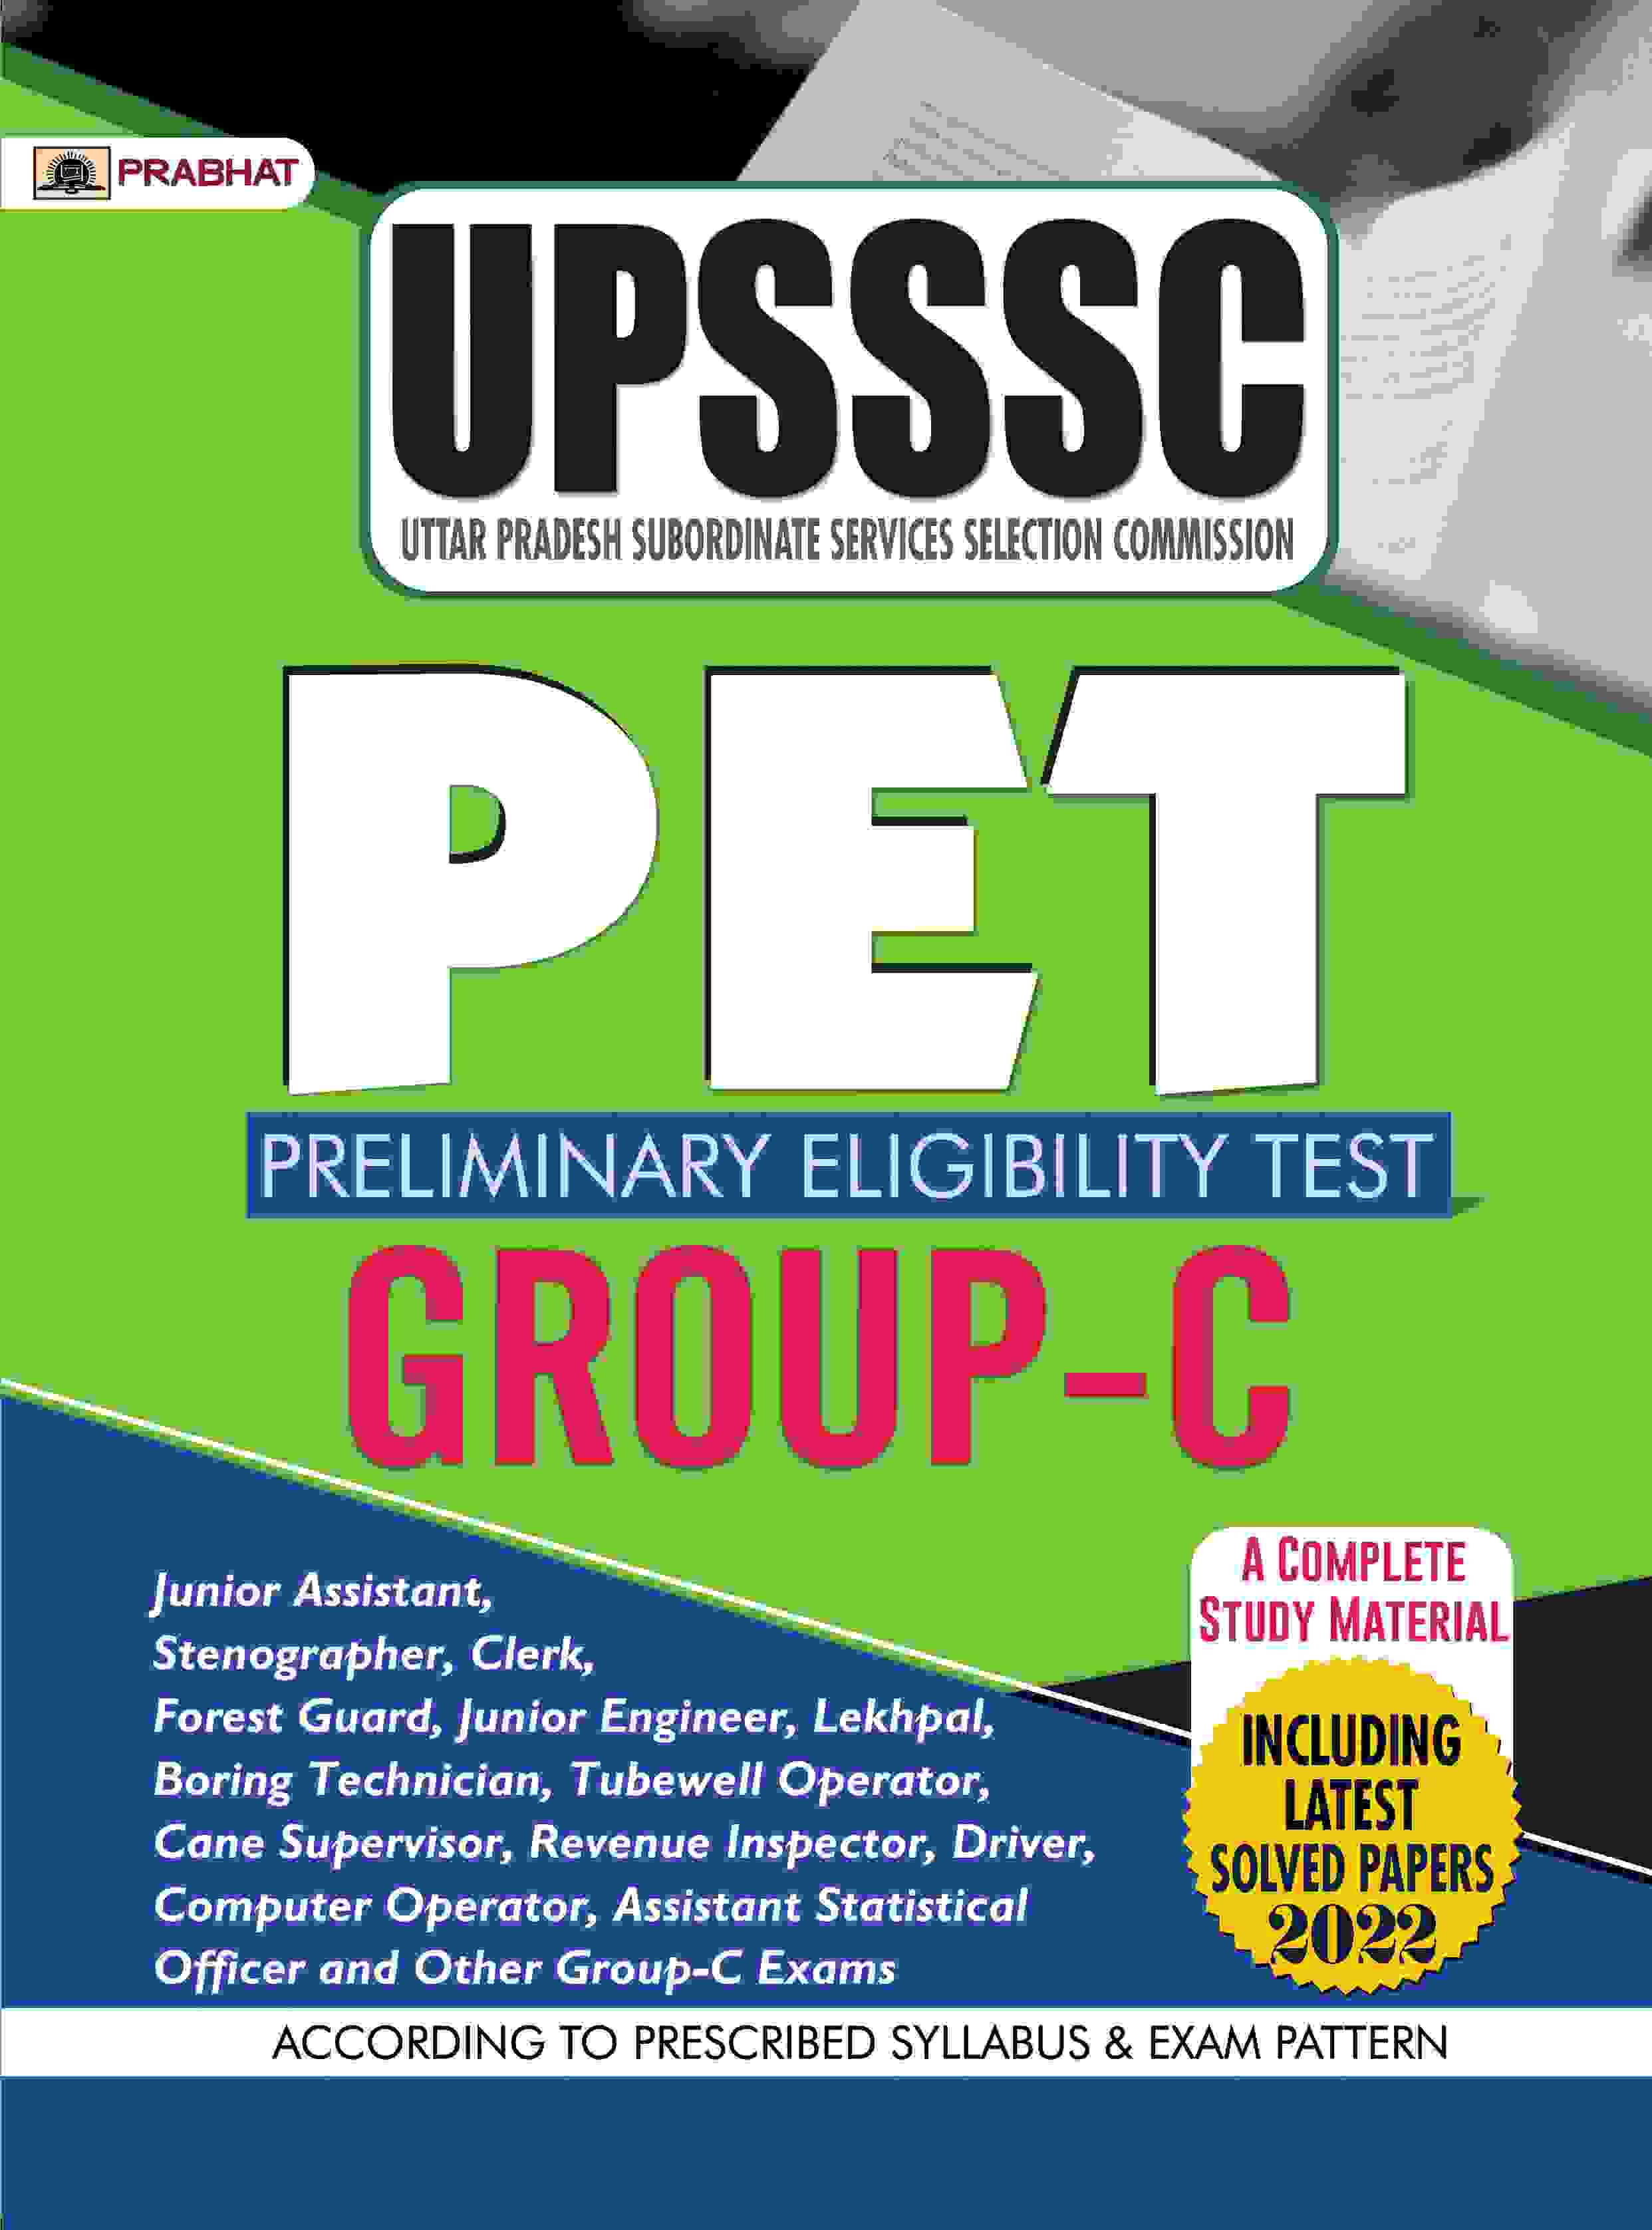 UPSSSC Uttar Pradesh Subordinate Services Selection Commission PET (Preliminary Eligibility Test) Group-C (Include Latest Solved Paper)